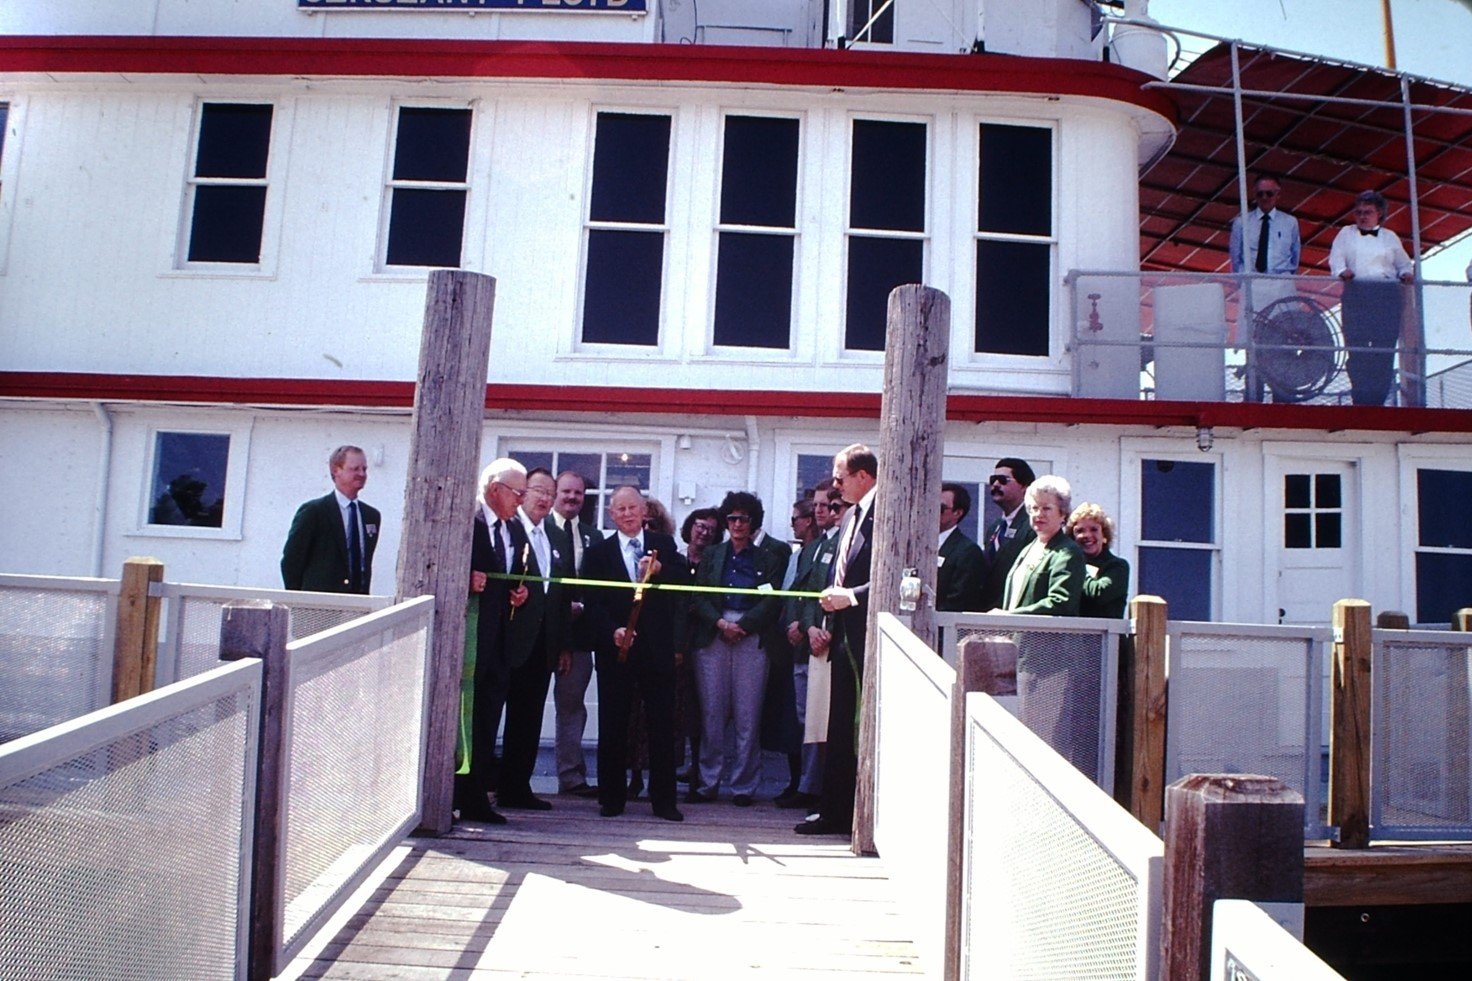 On this day in Sioux City history: The ribbon-cutting and grand opening for what is now known as the Sergeant Floyd River Museum &amp; Welcome Center was held on May 15, 1989. That same month, the Sergeant Floyd was designated as a National Historic 